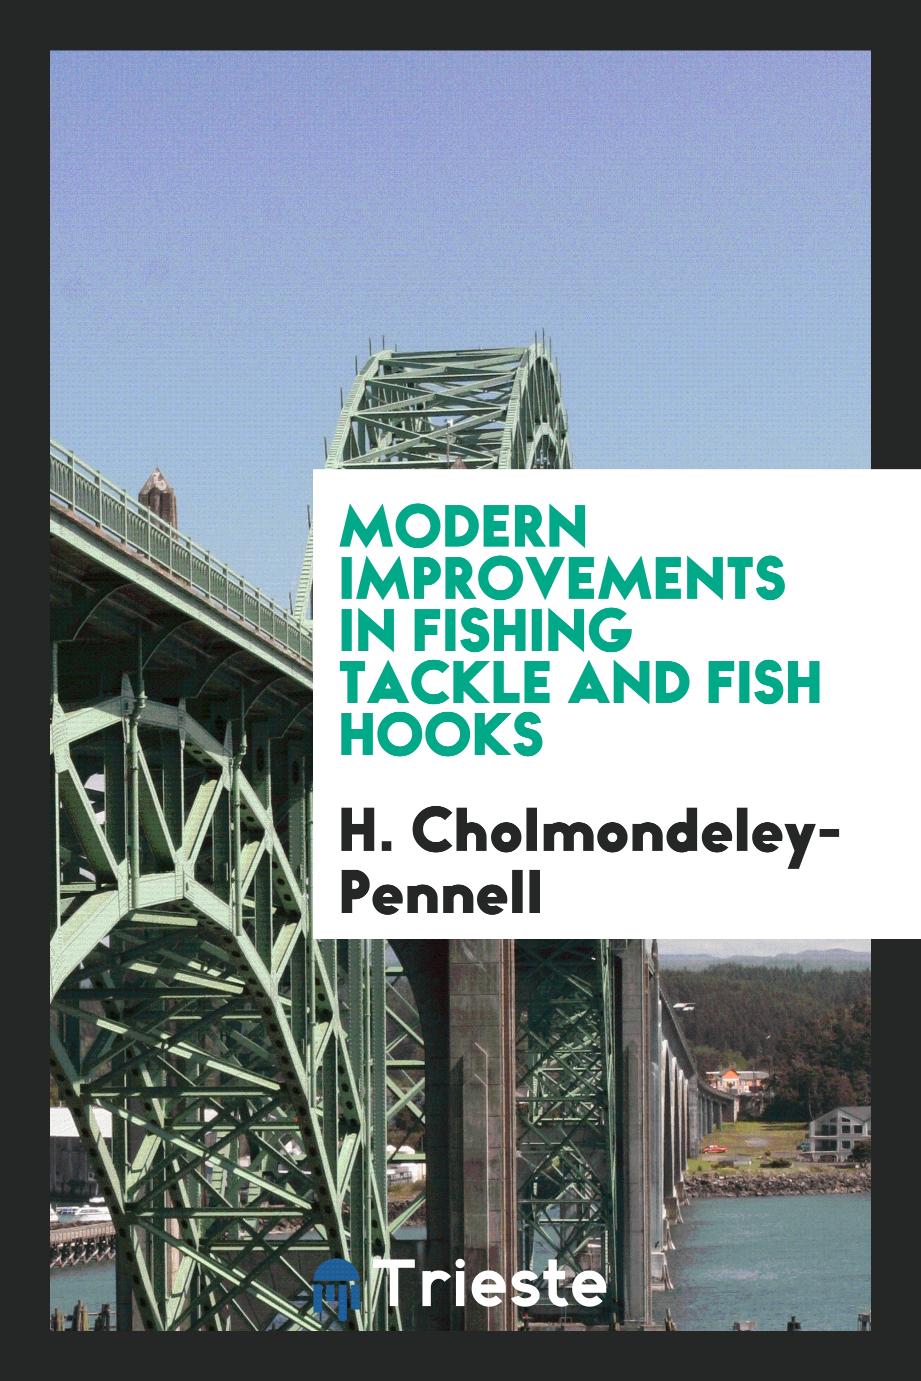 Modern improvements in fishing tackle and fish hooks